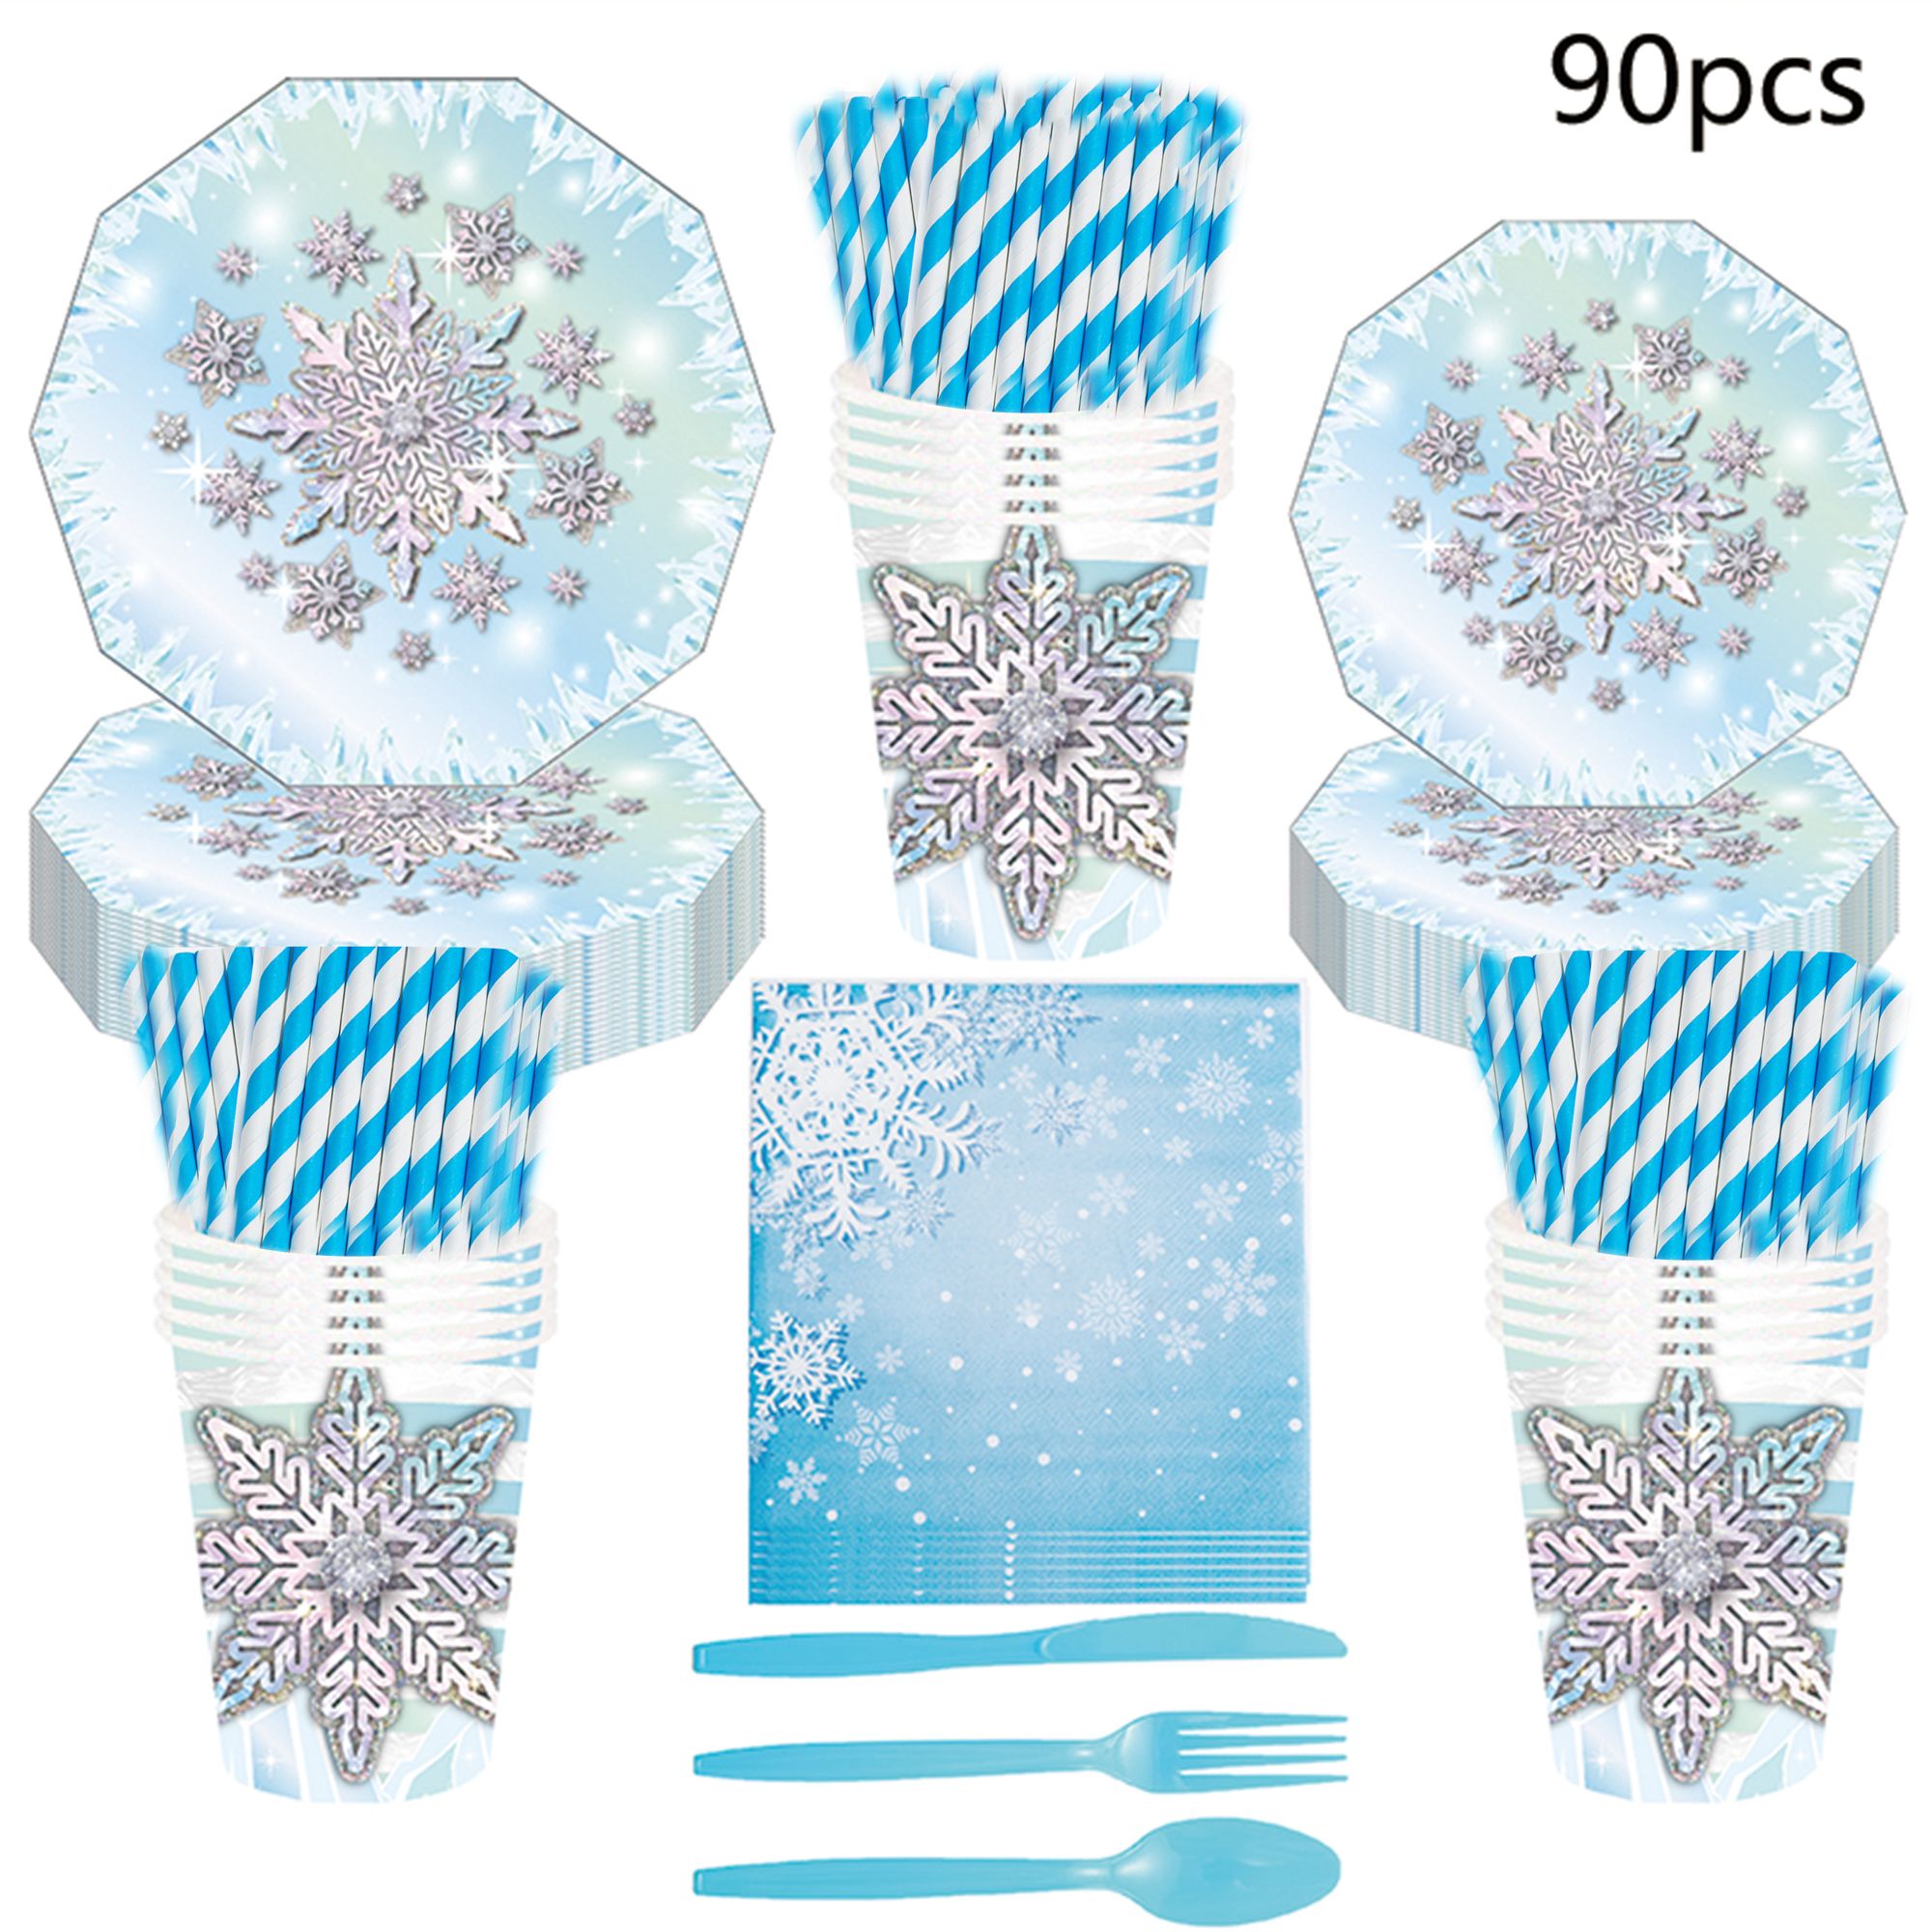 Snowflake Themed Birthday Party Decoration Set With Snow Castle Paper Plates, Cups, Napkins, And Straws